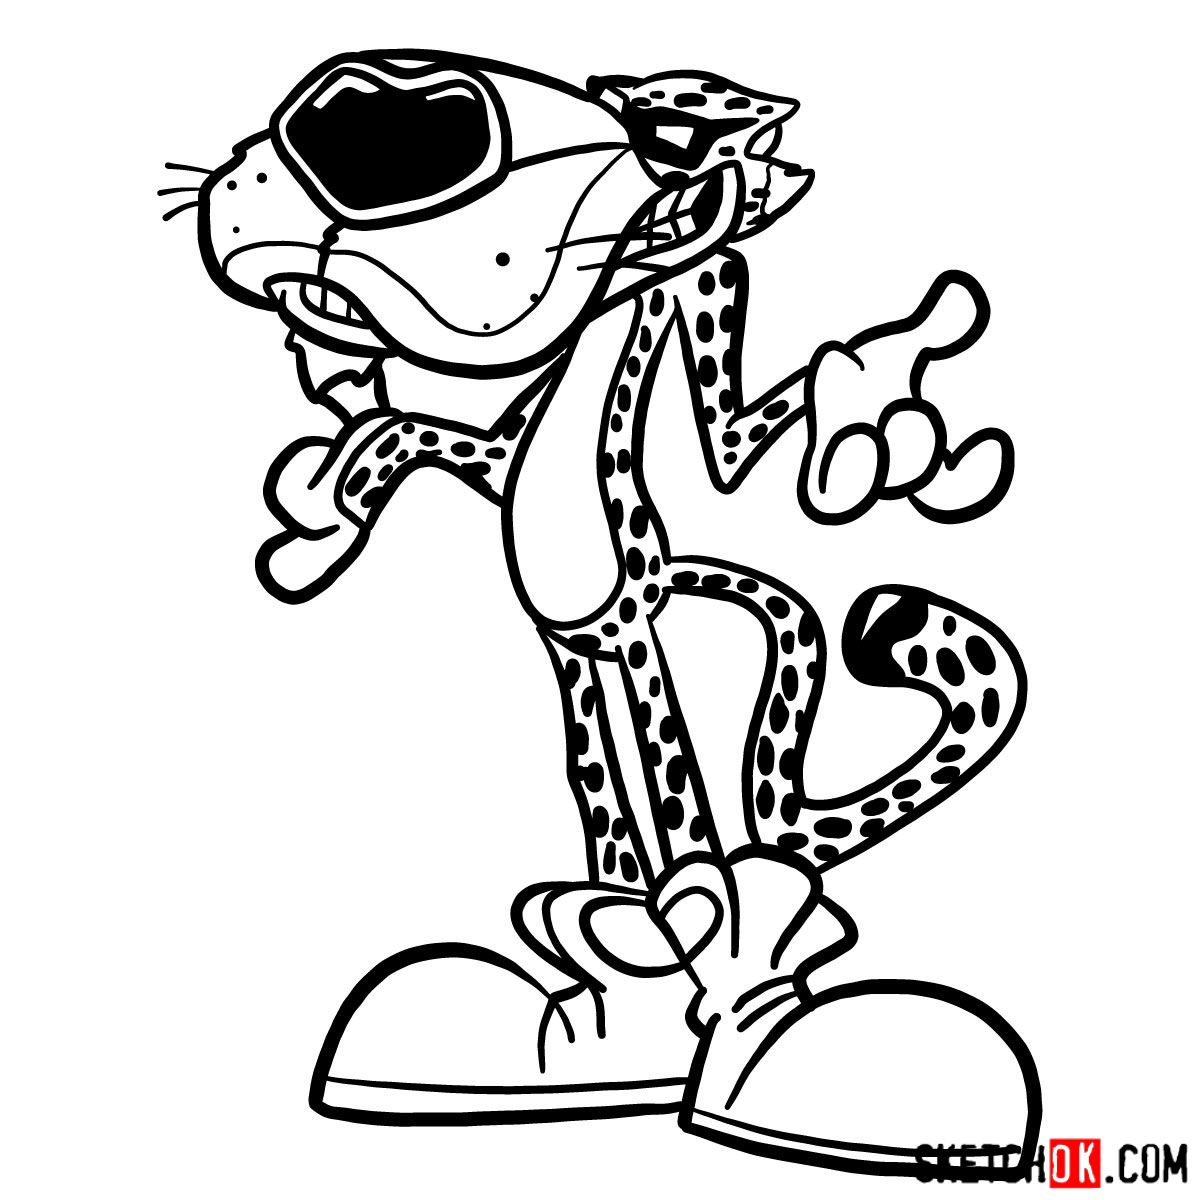 How to draw Chester Cheetah - step 15